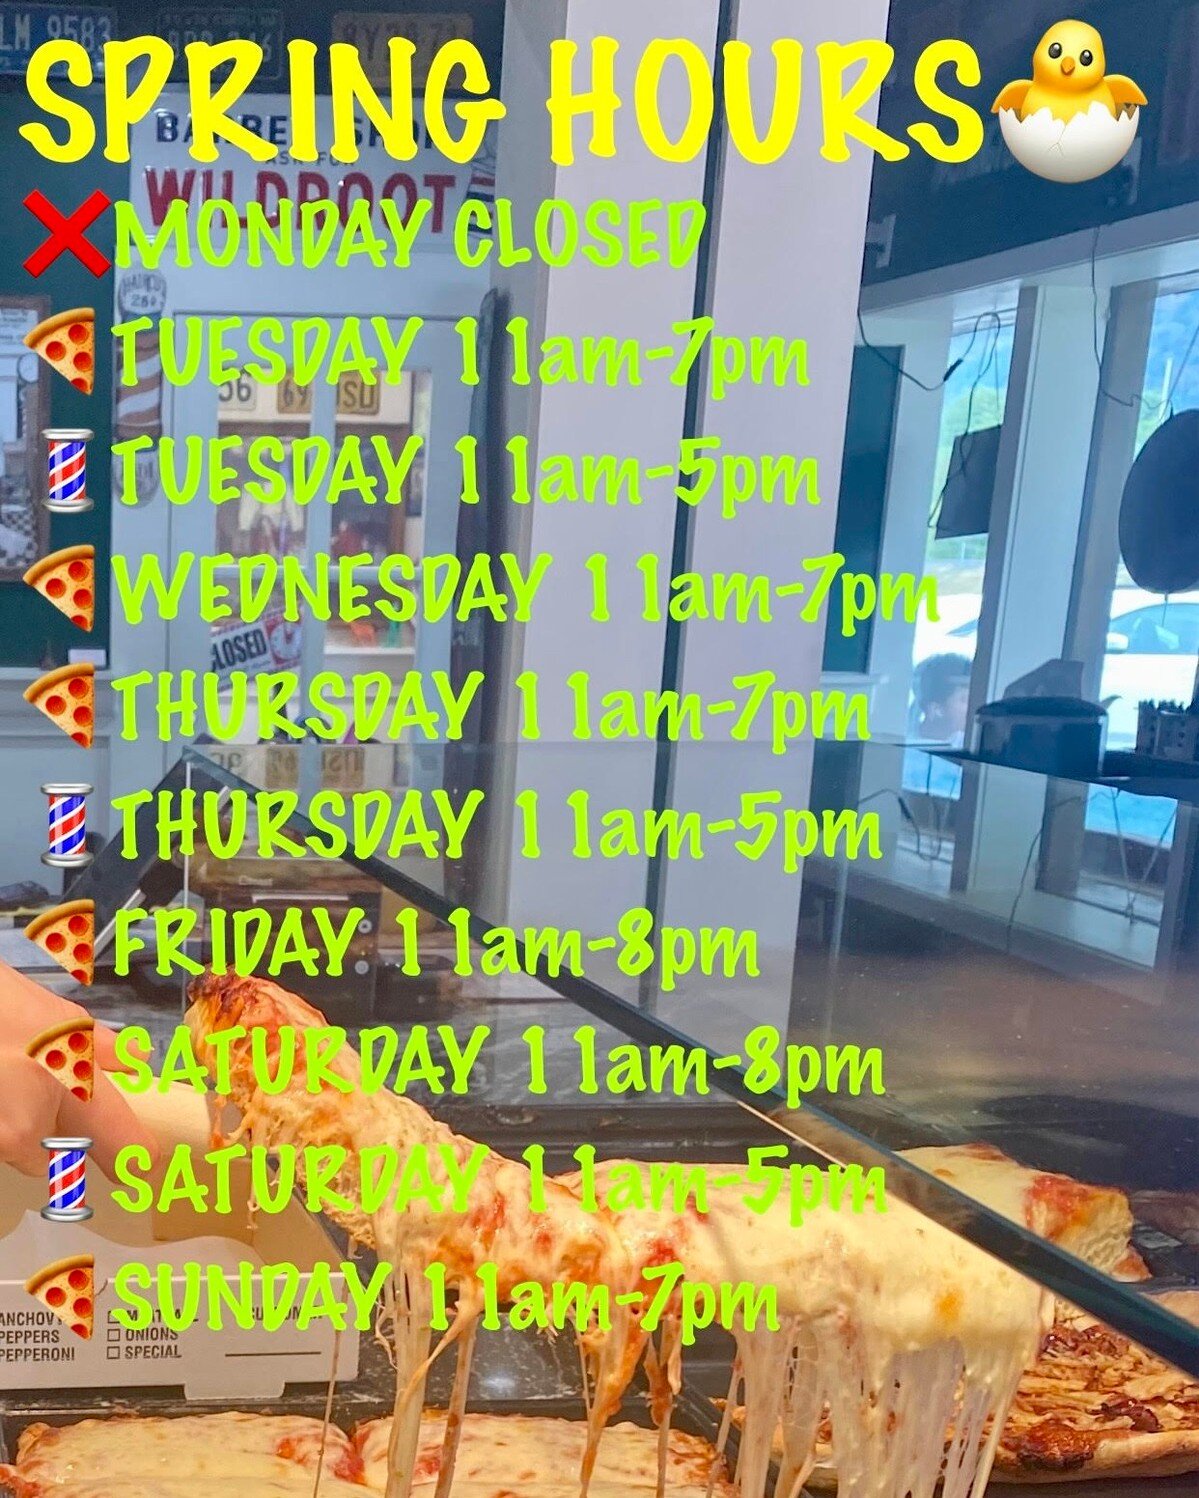 🍀 NEW SPRING HOURS 🪺
❌  Monday: Closed
🍕 Tuesday: 11am-7pm
🍕 Wednesday: 11am-7pm
🍕 Thursday: 11am-7pm
🍕 Friday: 11am-8pm
🍕 Saturday: 11am-8pm
🍕 Sunday: 11am-7pm